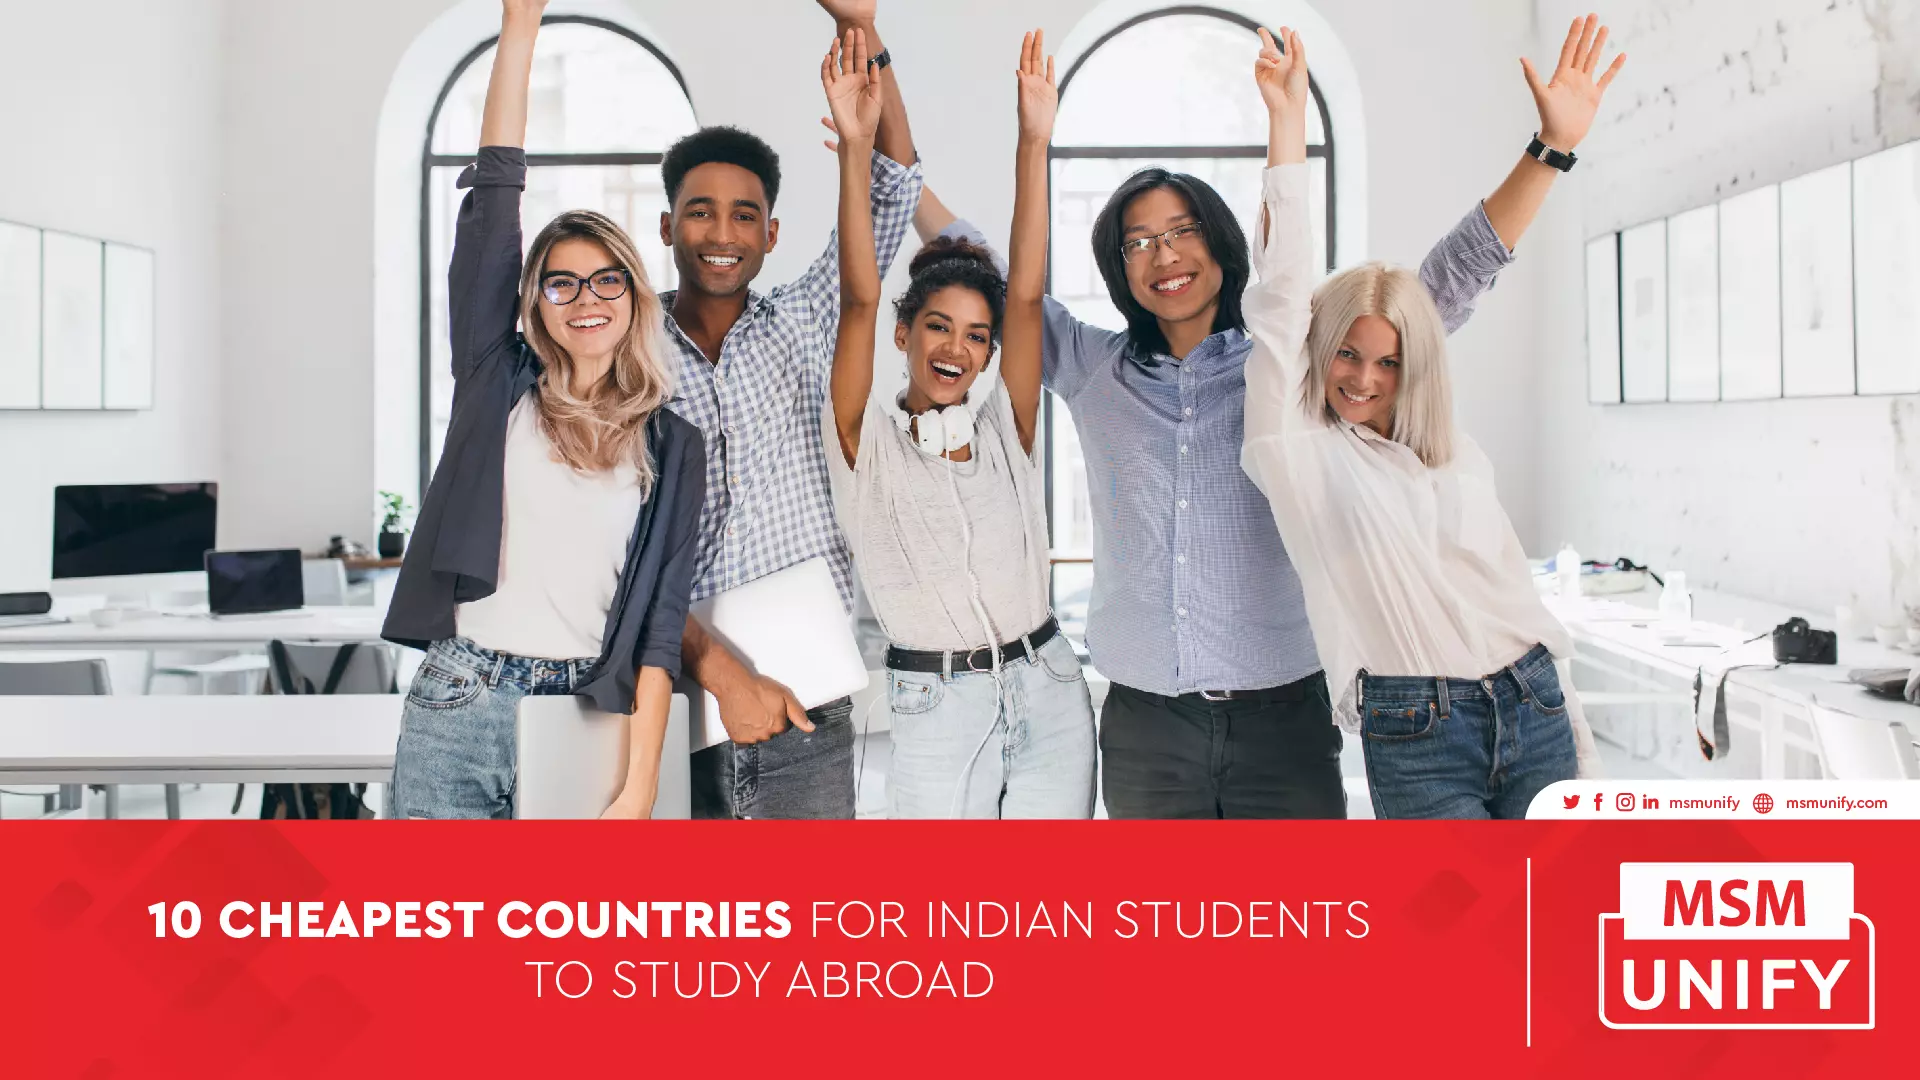 112522 MSM Unify 10 Cheapest Countries for Indian Students to Study Abroad 01